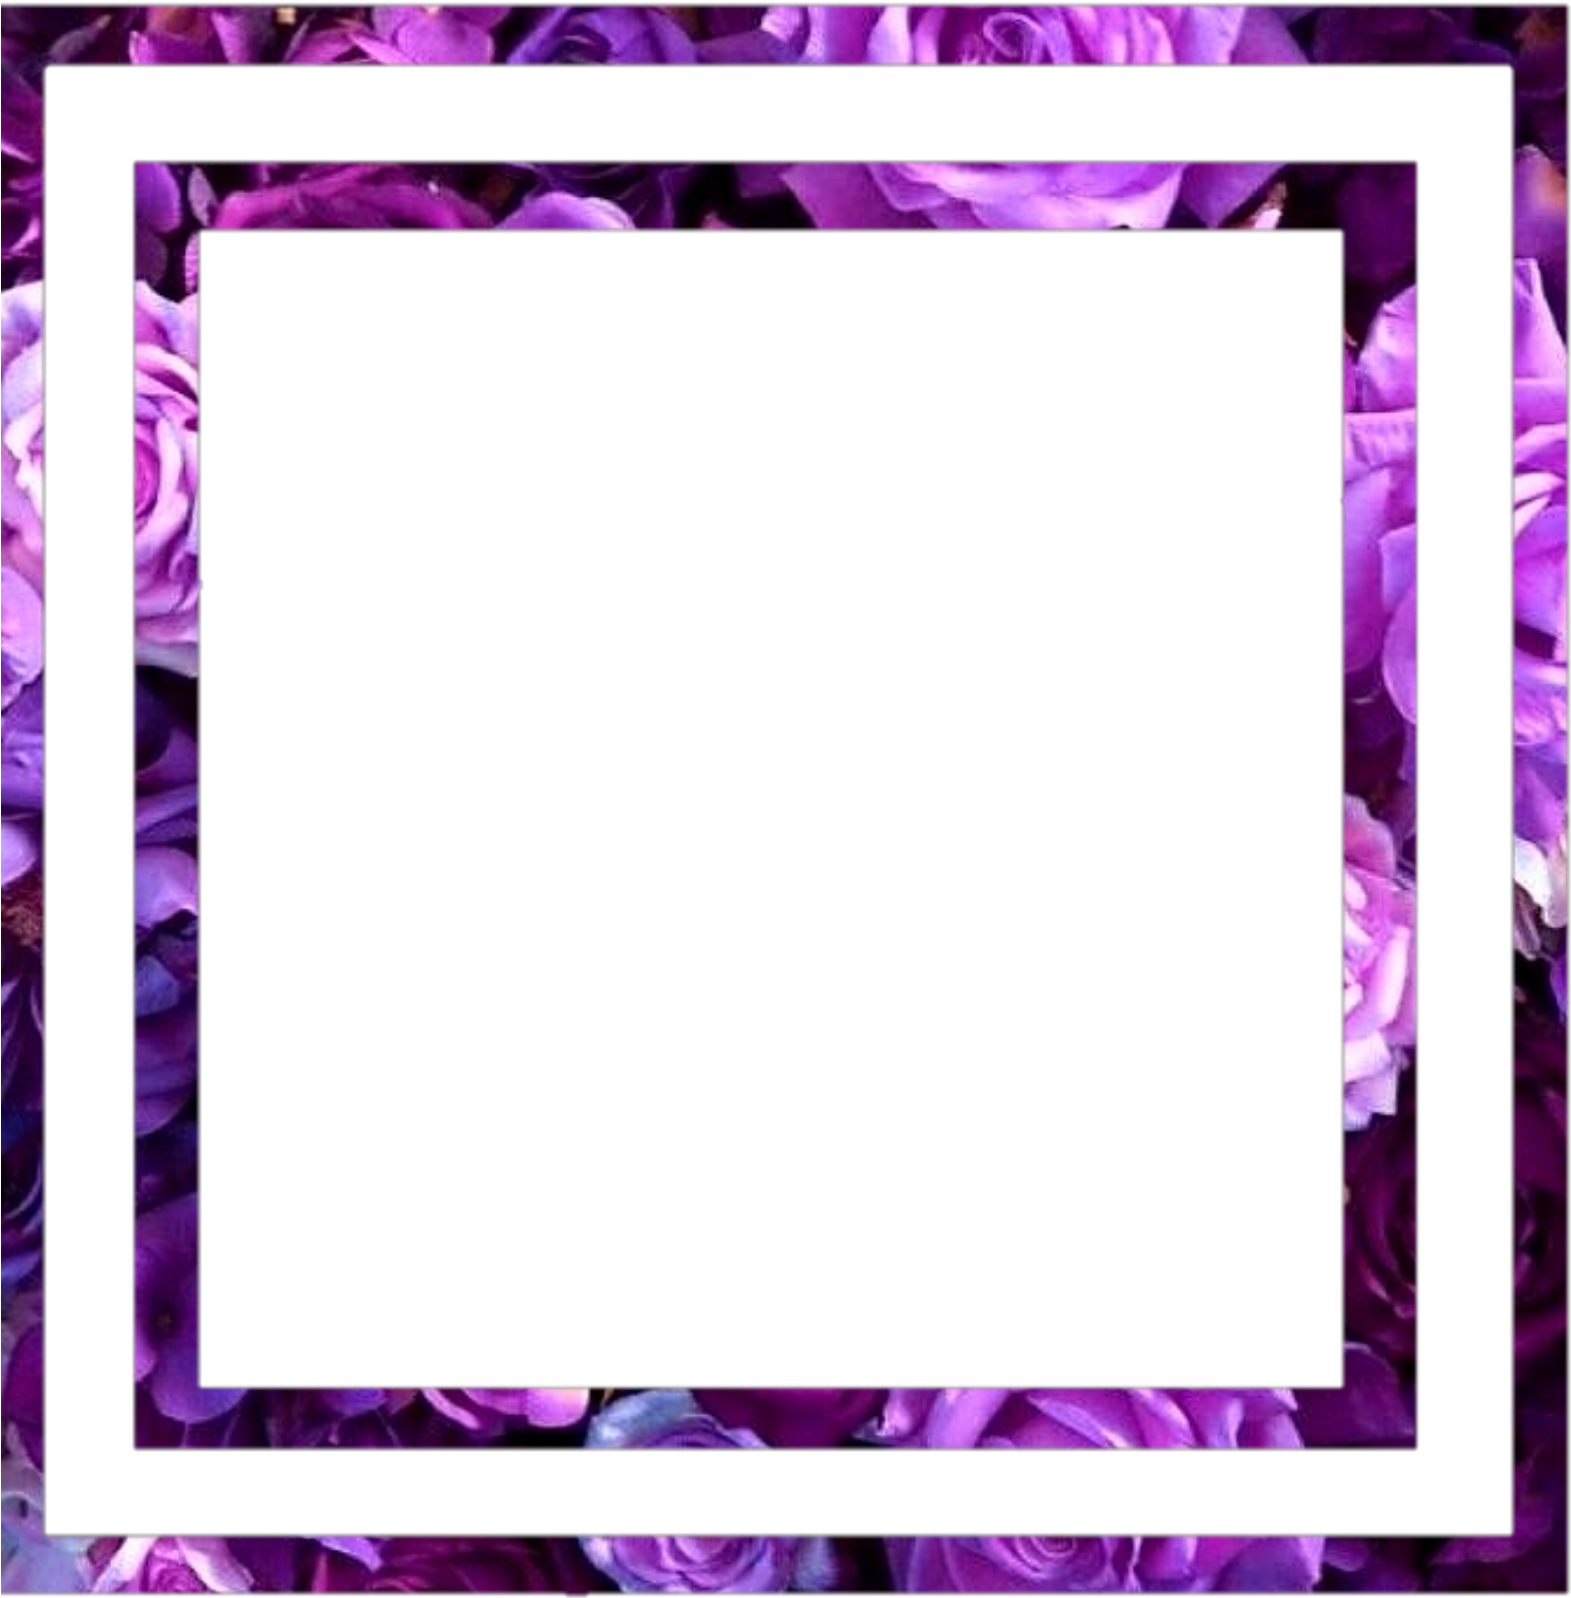 A Black Square With Purple Flowers